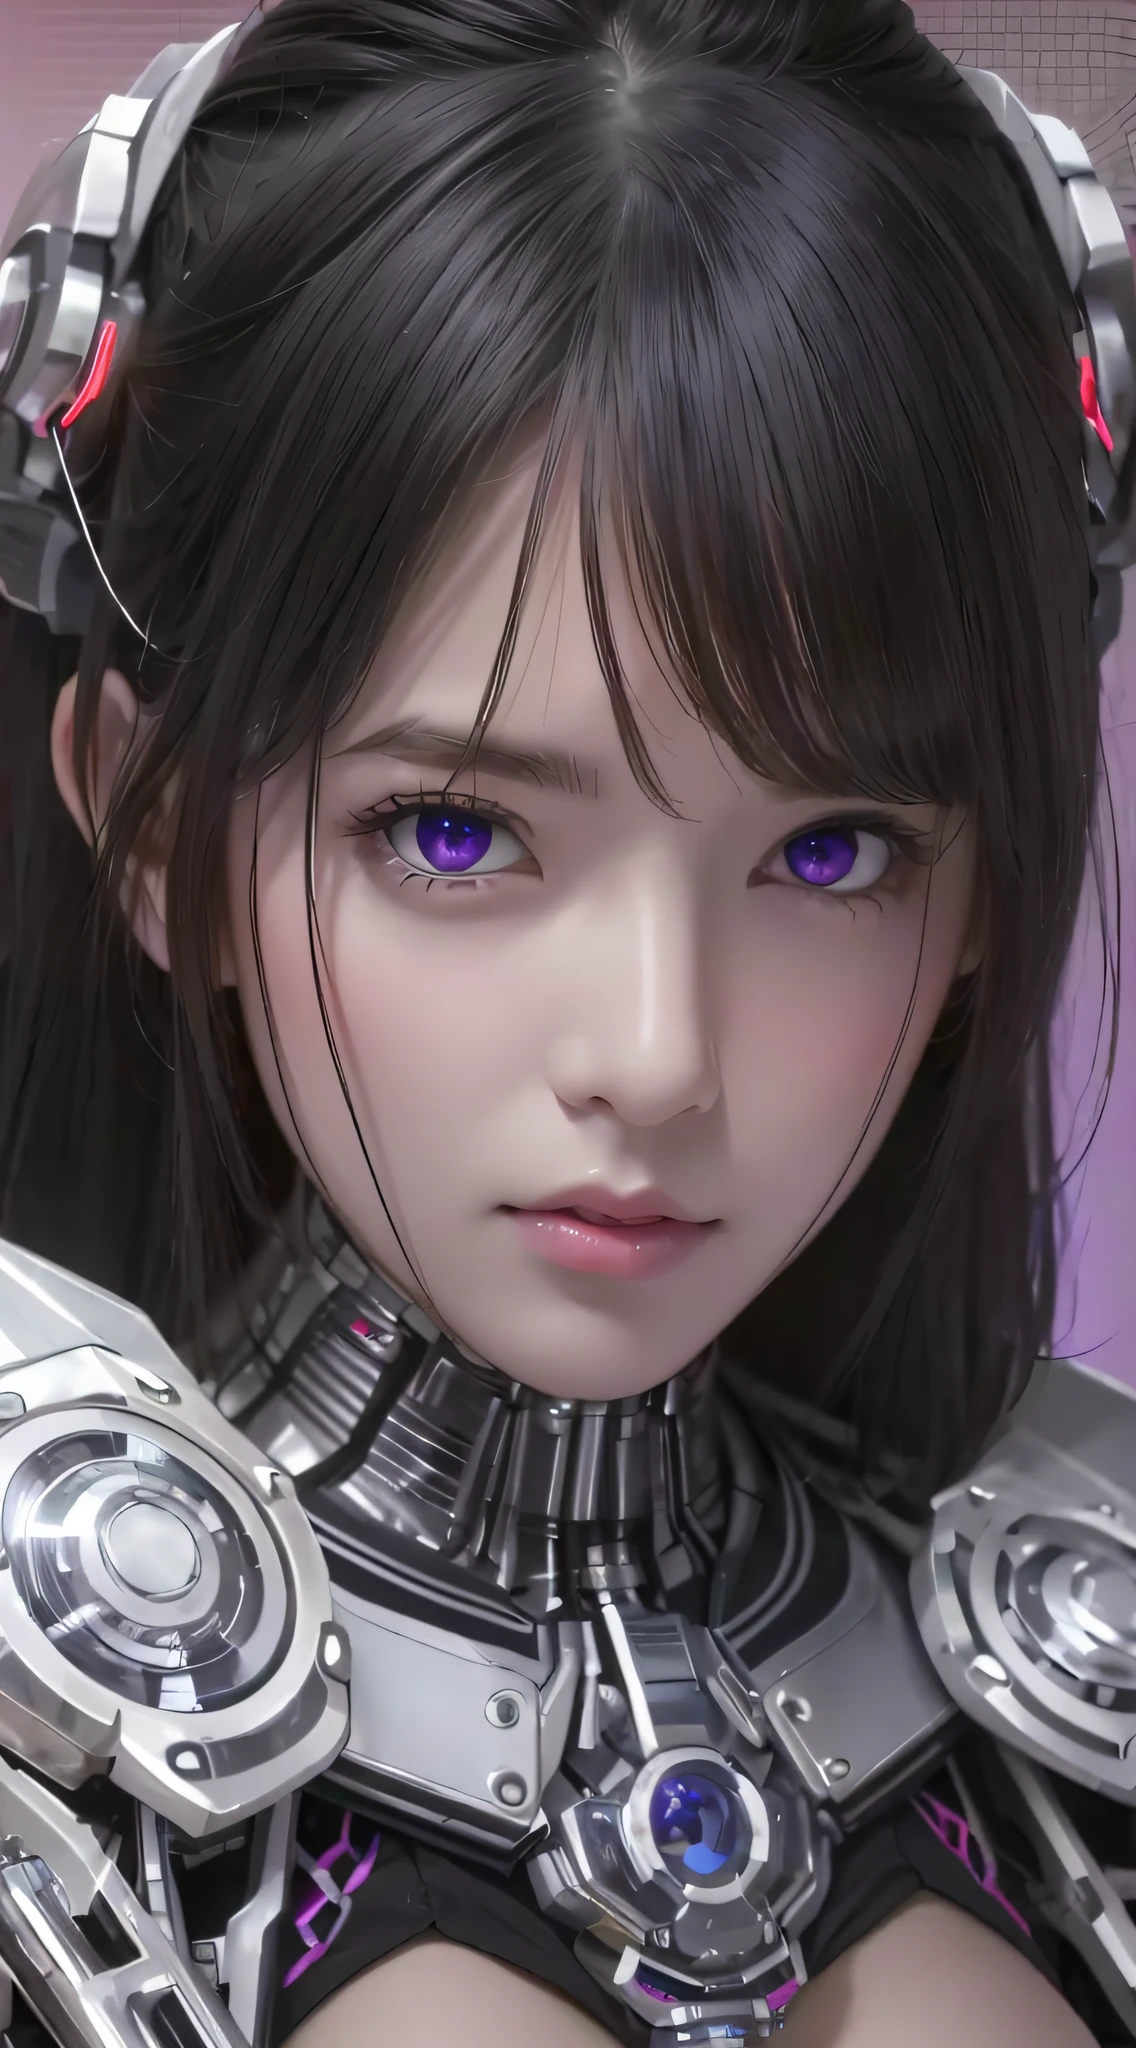 a close up of a woman with a futuristic outfit and headphones, Cute cyborg girl, beautiful girl cyborg, perfect android girl, cyborg - girl, portrait anime space cadet girl, perfect anime cyborg woman, girl in mecha cyber armor, Detailed digital anime art, Stunning anime face portrait, Cyborg girl, Smooth anime CG art, Beautiful asian girl cyborg